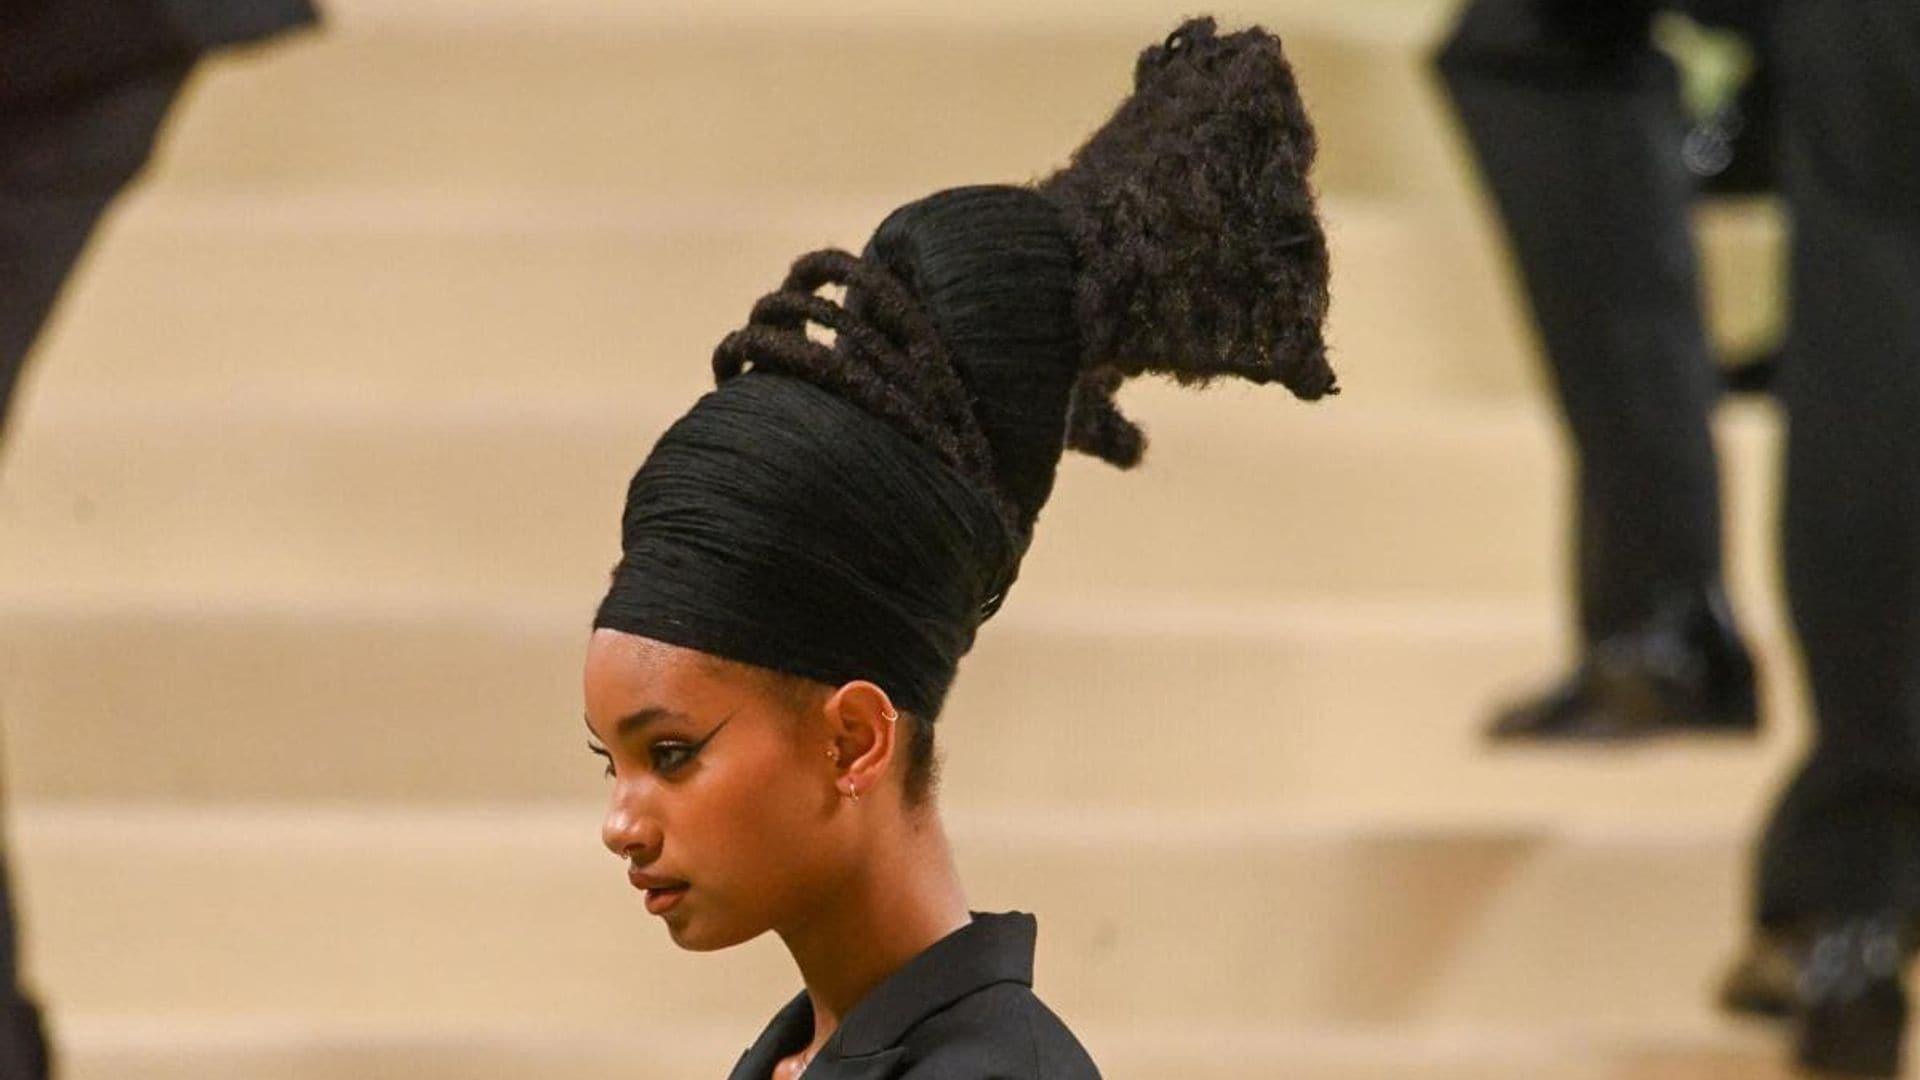 Willow Smith’s Met Gala hair was a nod to the Mangbetu tribe of Congo